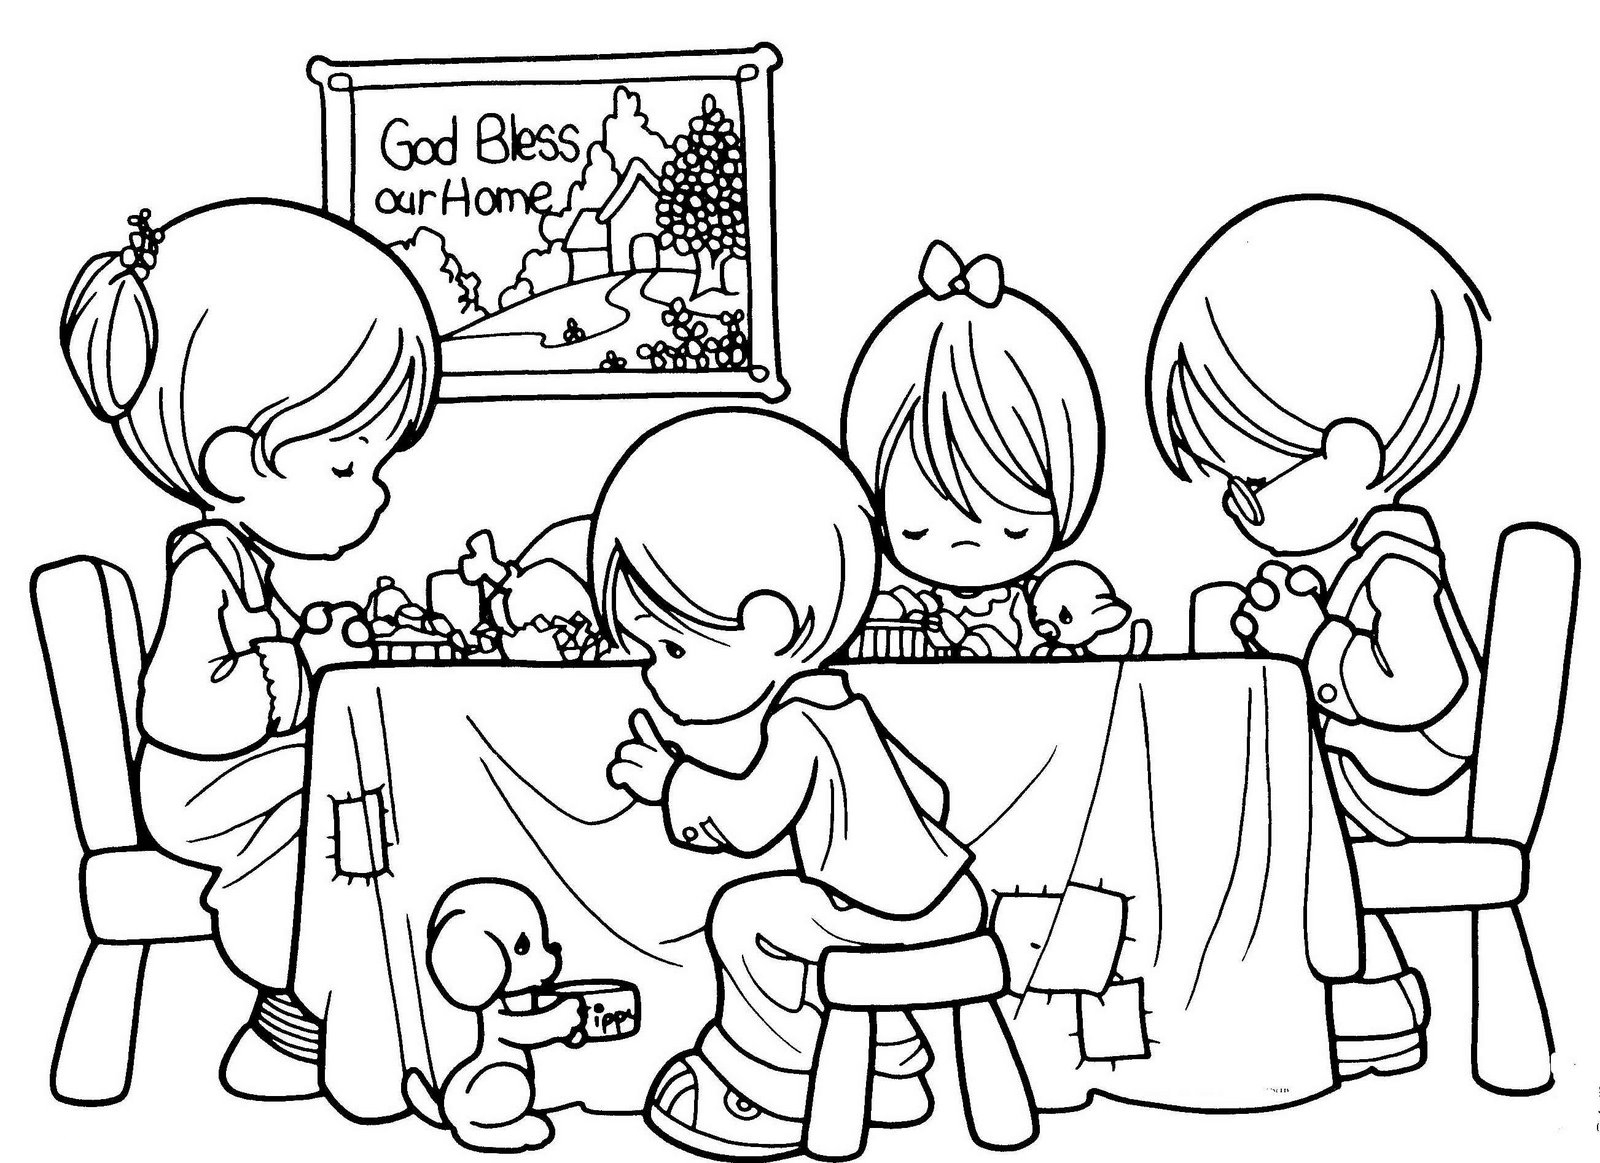 Christian Coloring Pages For Toddlers Free Printable Christian Coloring Pages For Kids Best Coloring